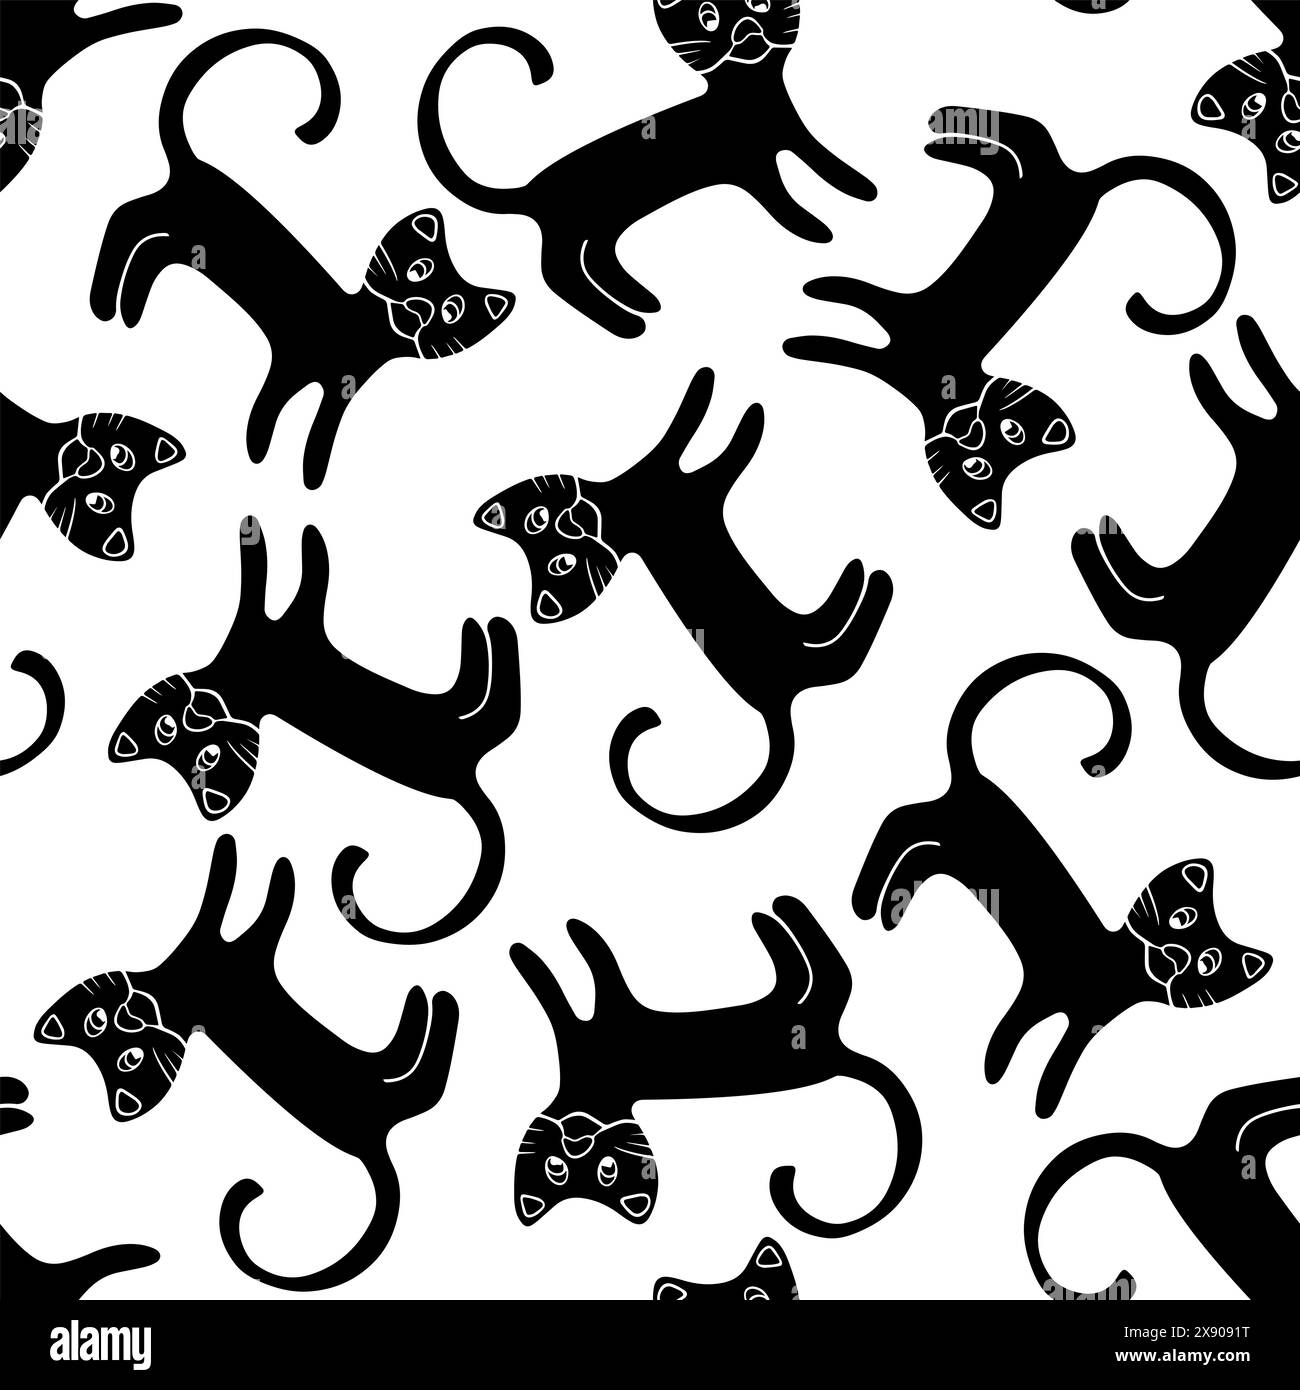 Vector isolated illustration of a pattern with silhouettes of cats on a white background. Black and white pattern with animals. Stock Vector